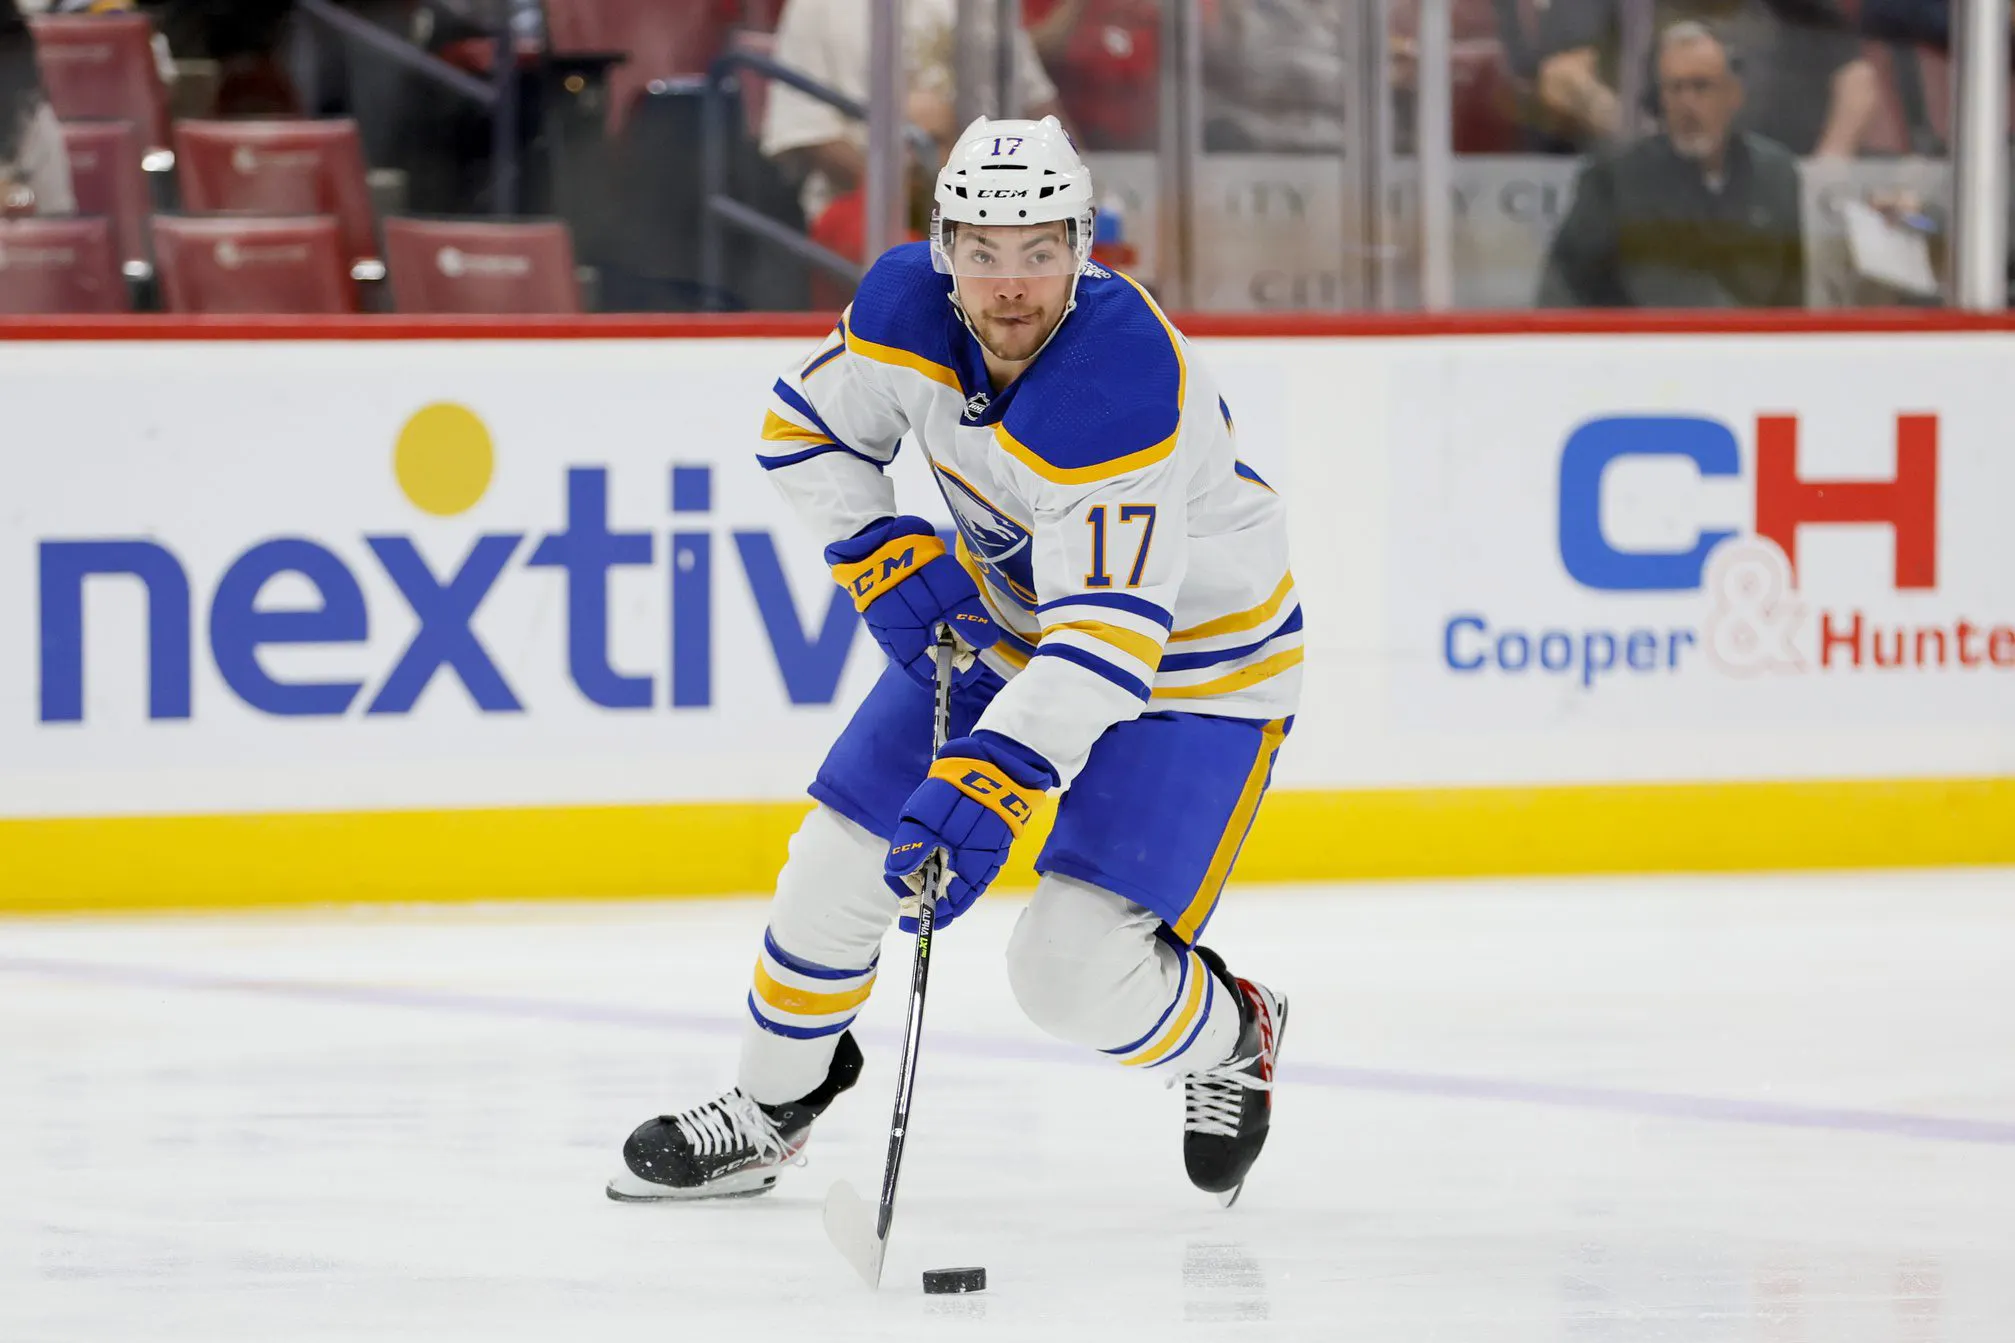 Red Wings’ Michael Hutchinson, Sabres’ Tyson  Jost placed on waivers